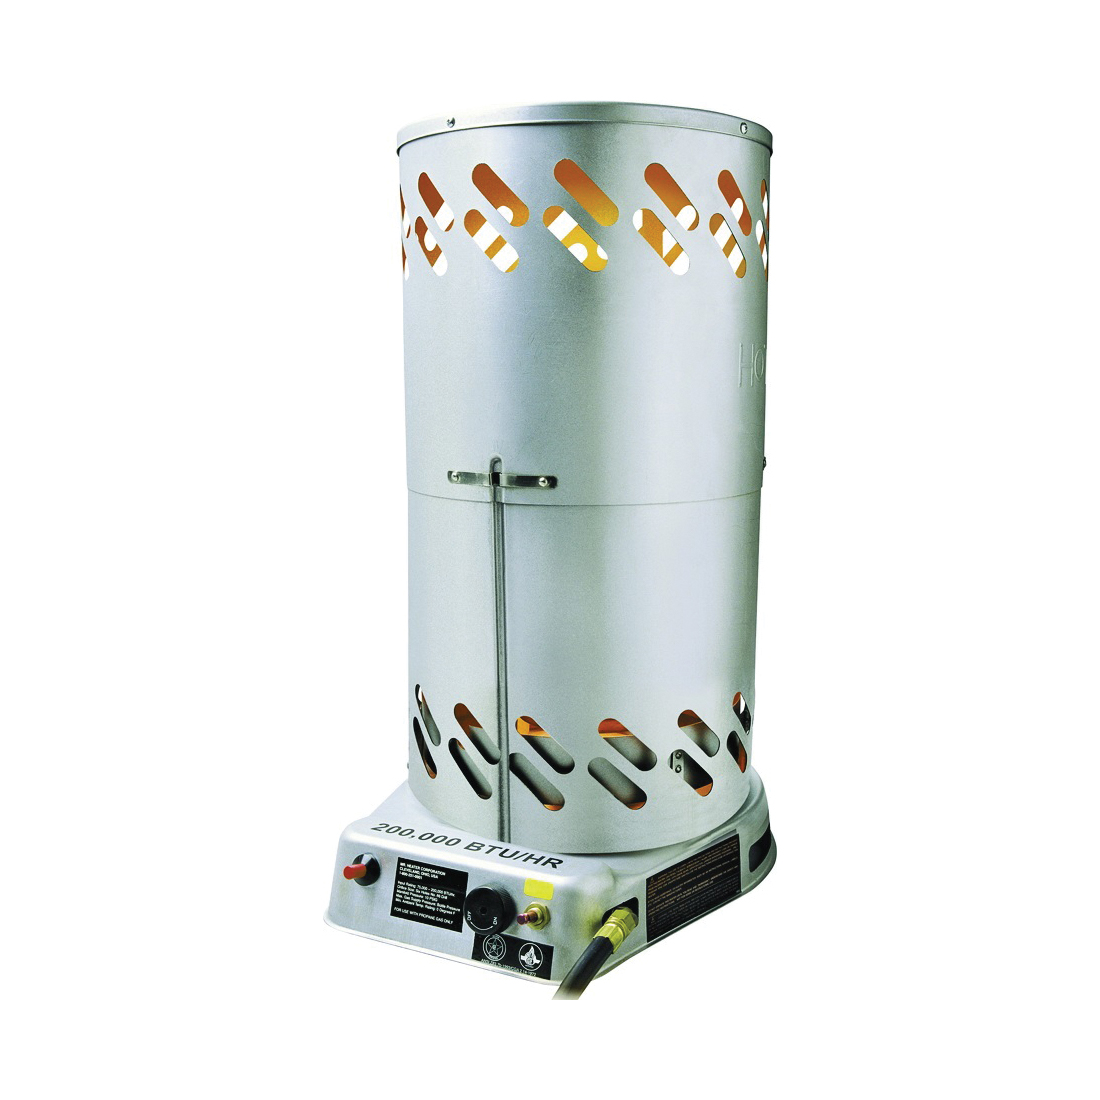 Mr. Heater F270500 Convection Heater, 100 lb Fuel Tank, Propane, 75000 to 200000 Btu, 5000 sq-ft Heating Area